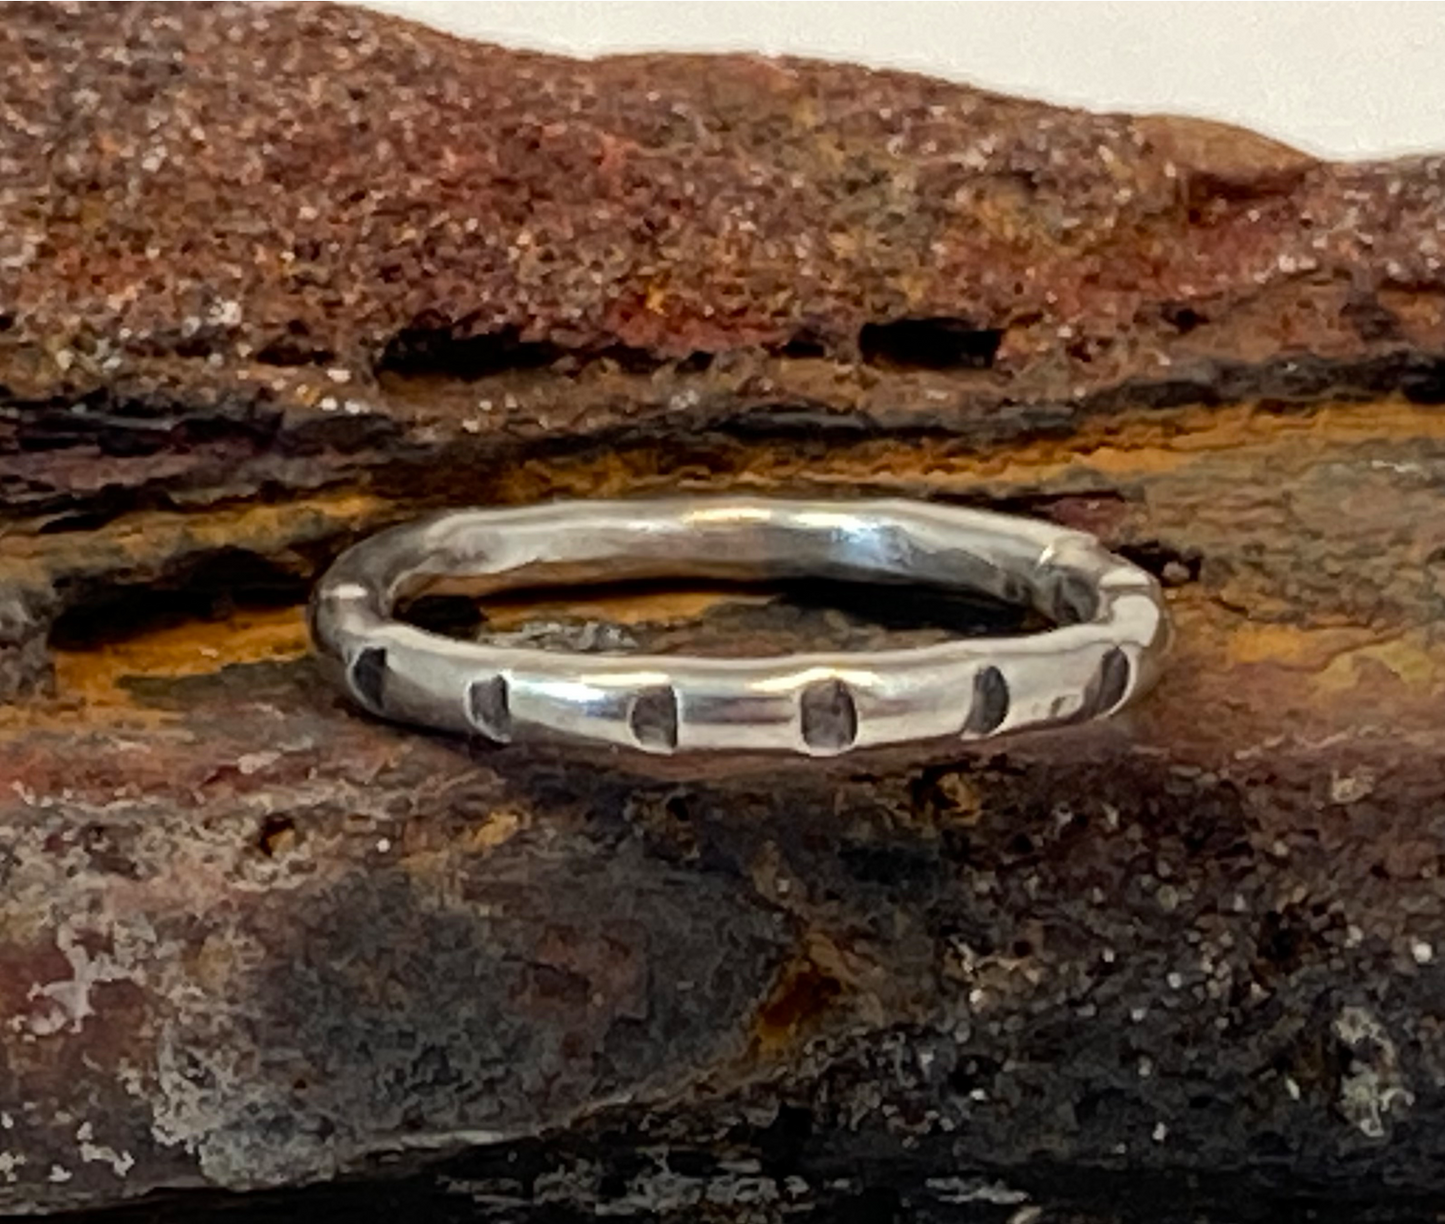 One-of-a-kind hand-crafted ring.  Round sterling silver band. Band is adorned with lined stamp pattern. Women's size 4-1/2